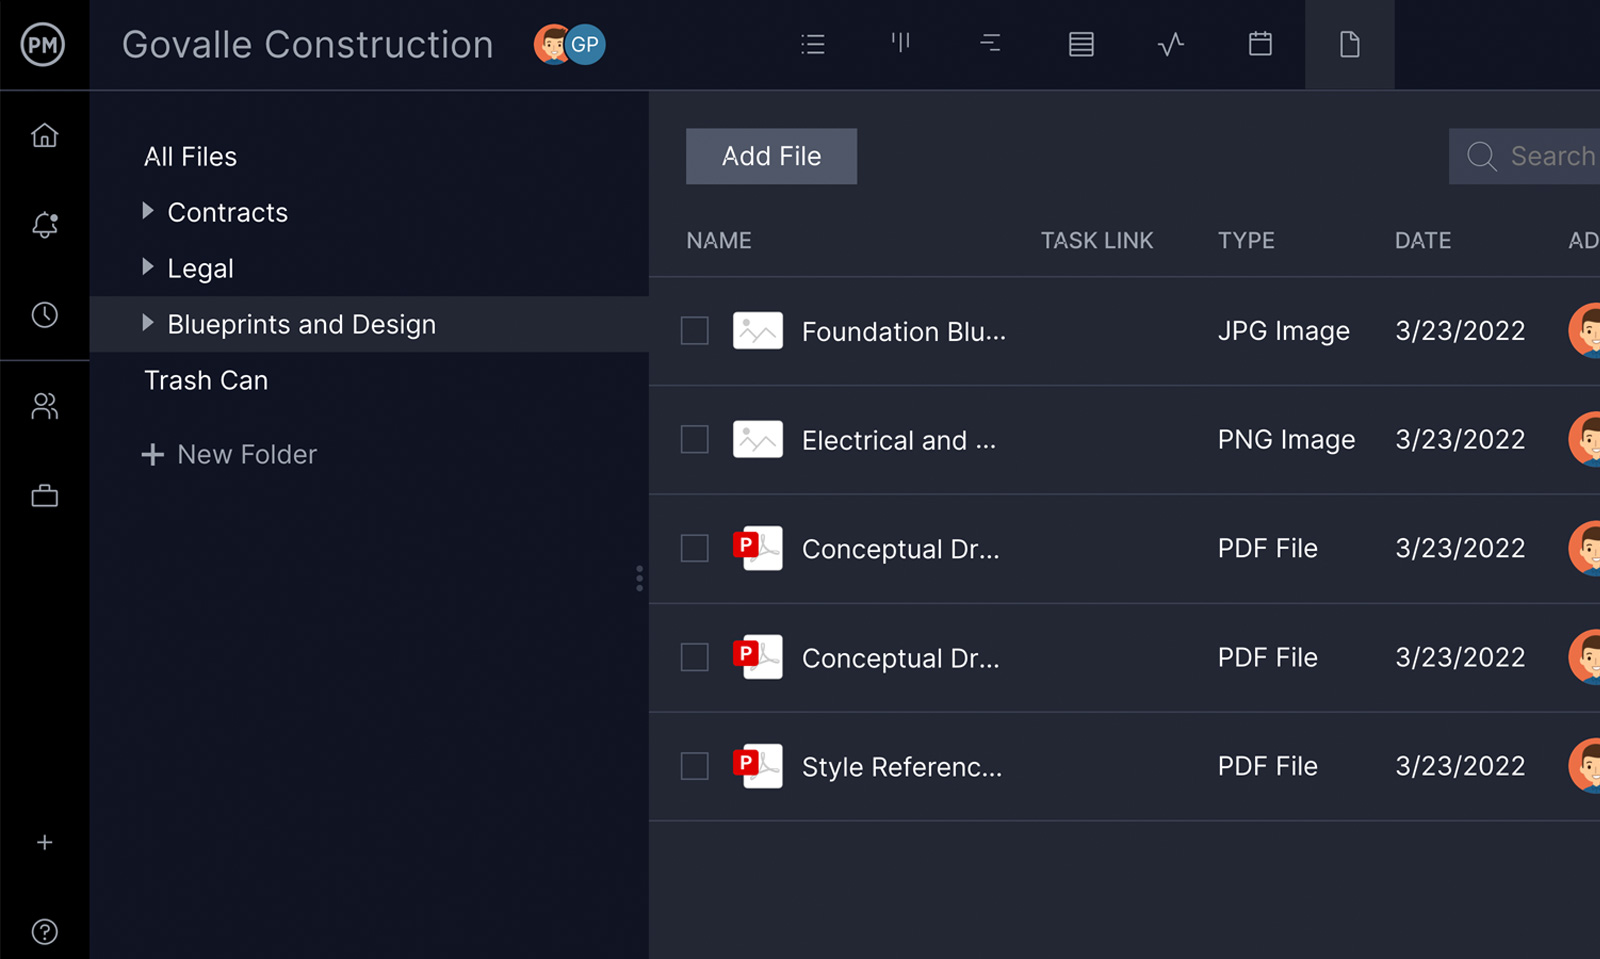 ProjectManager's file sharing interface